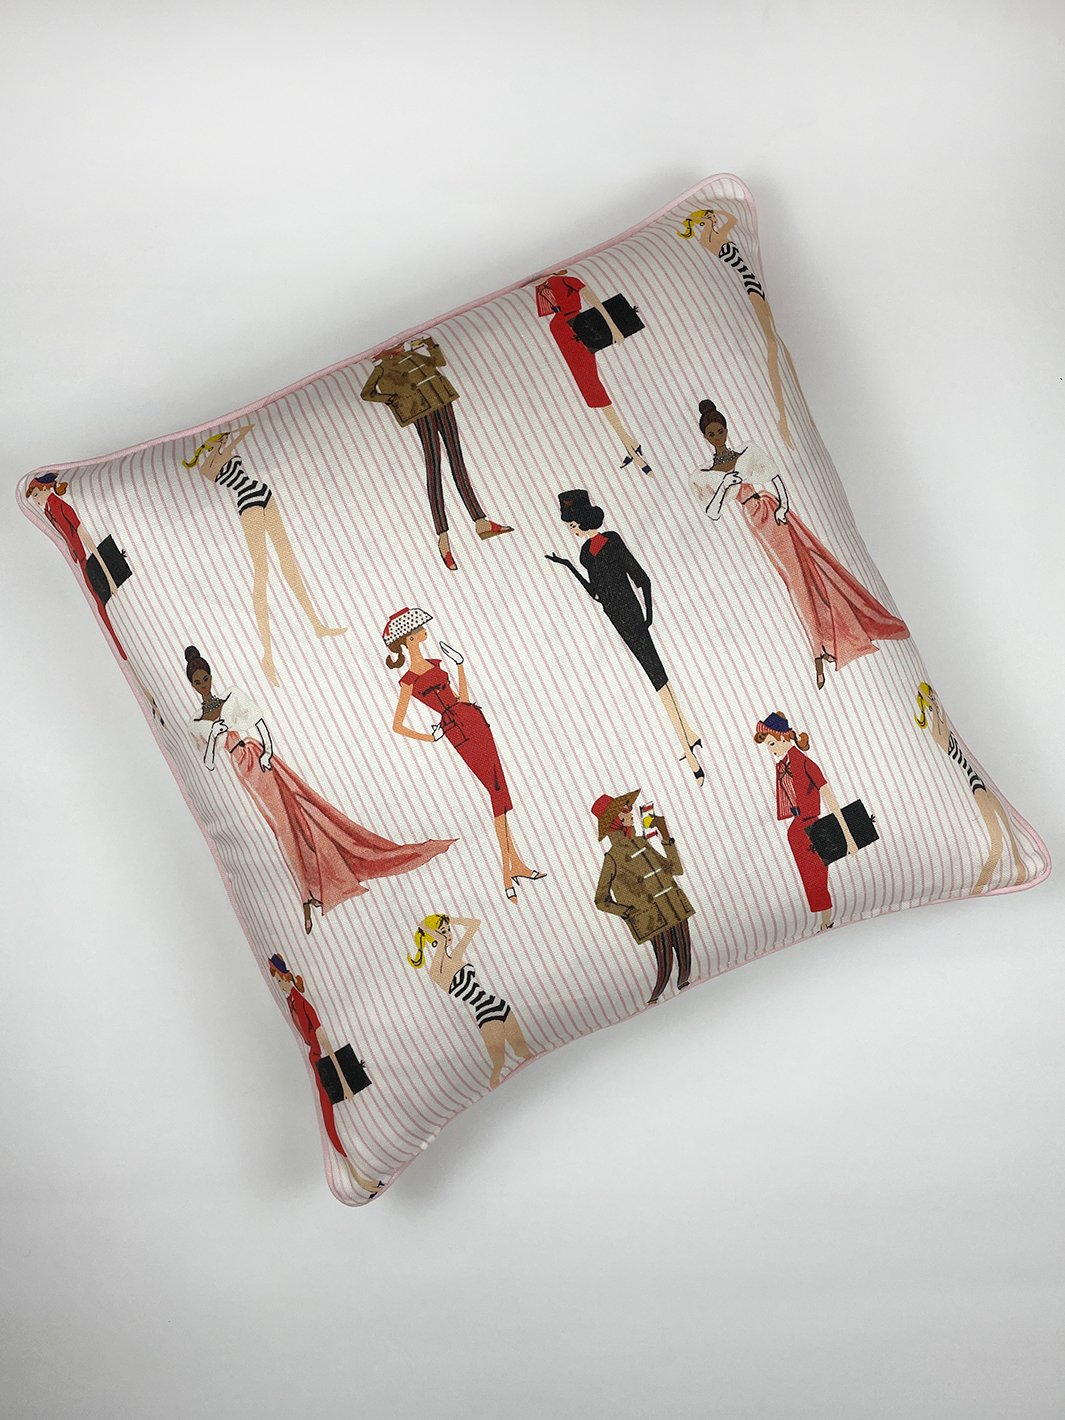 'Vintage Pinstripe' Throw Pillow by Barbie™ - Pink